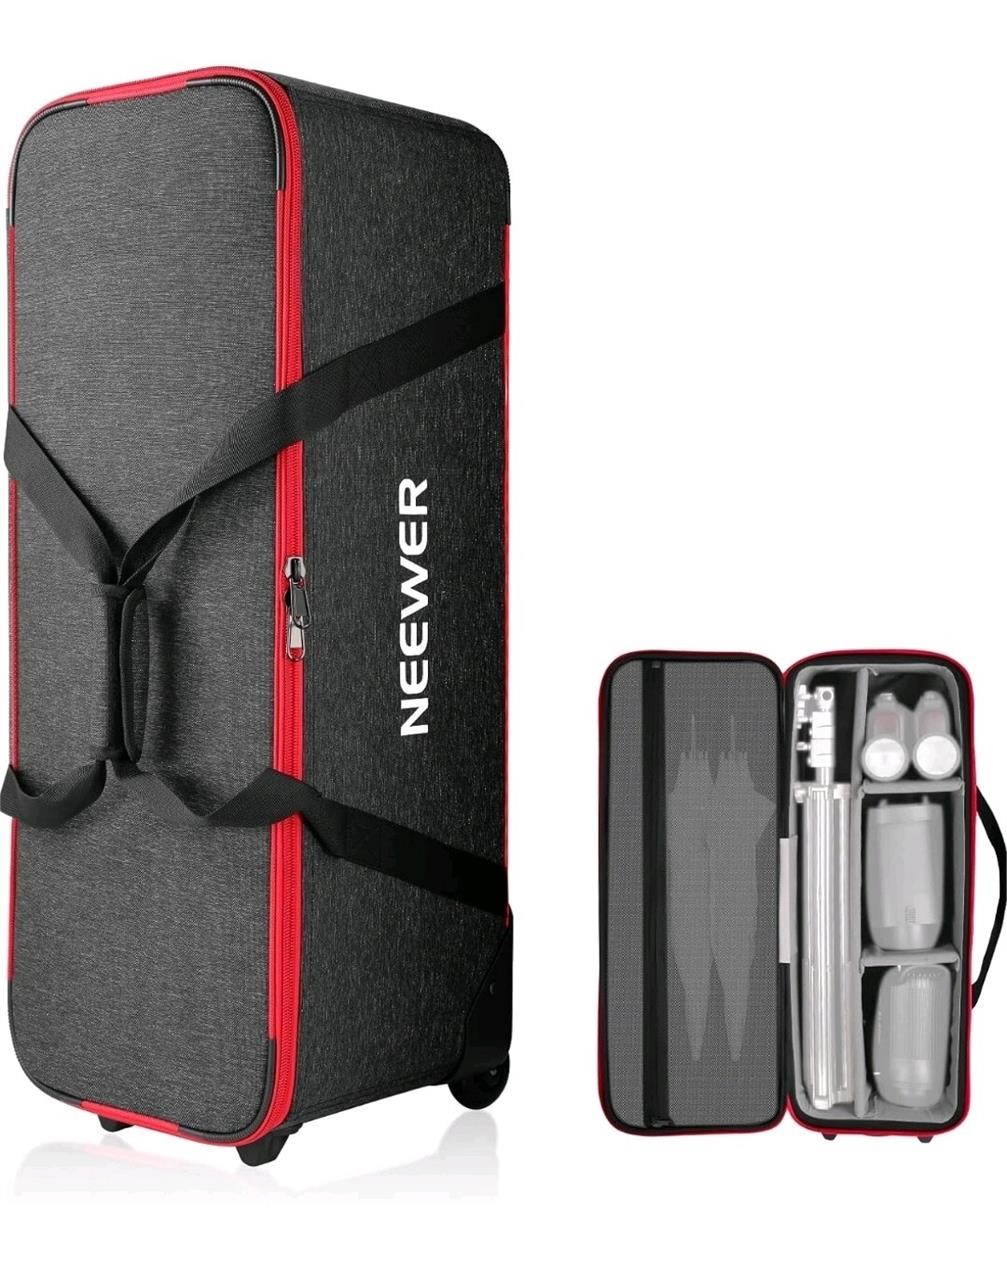 Neewer Trolley Case for Photo Studio